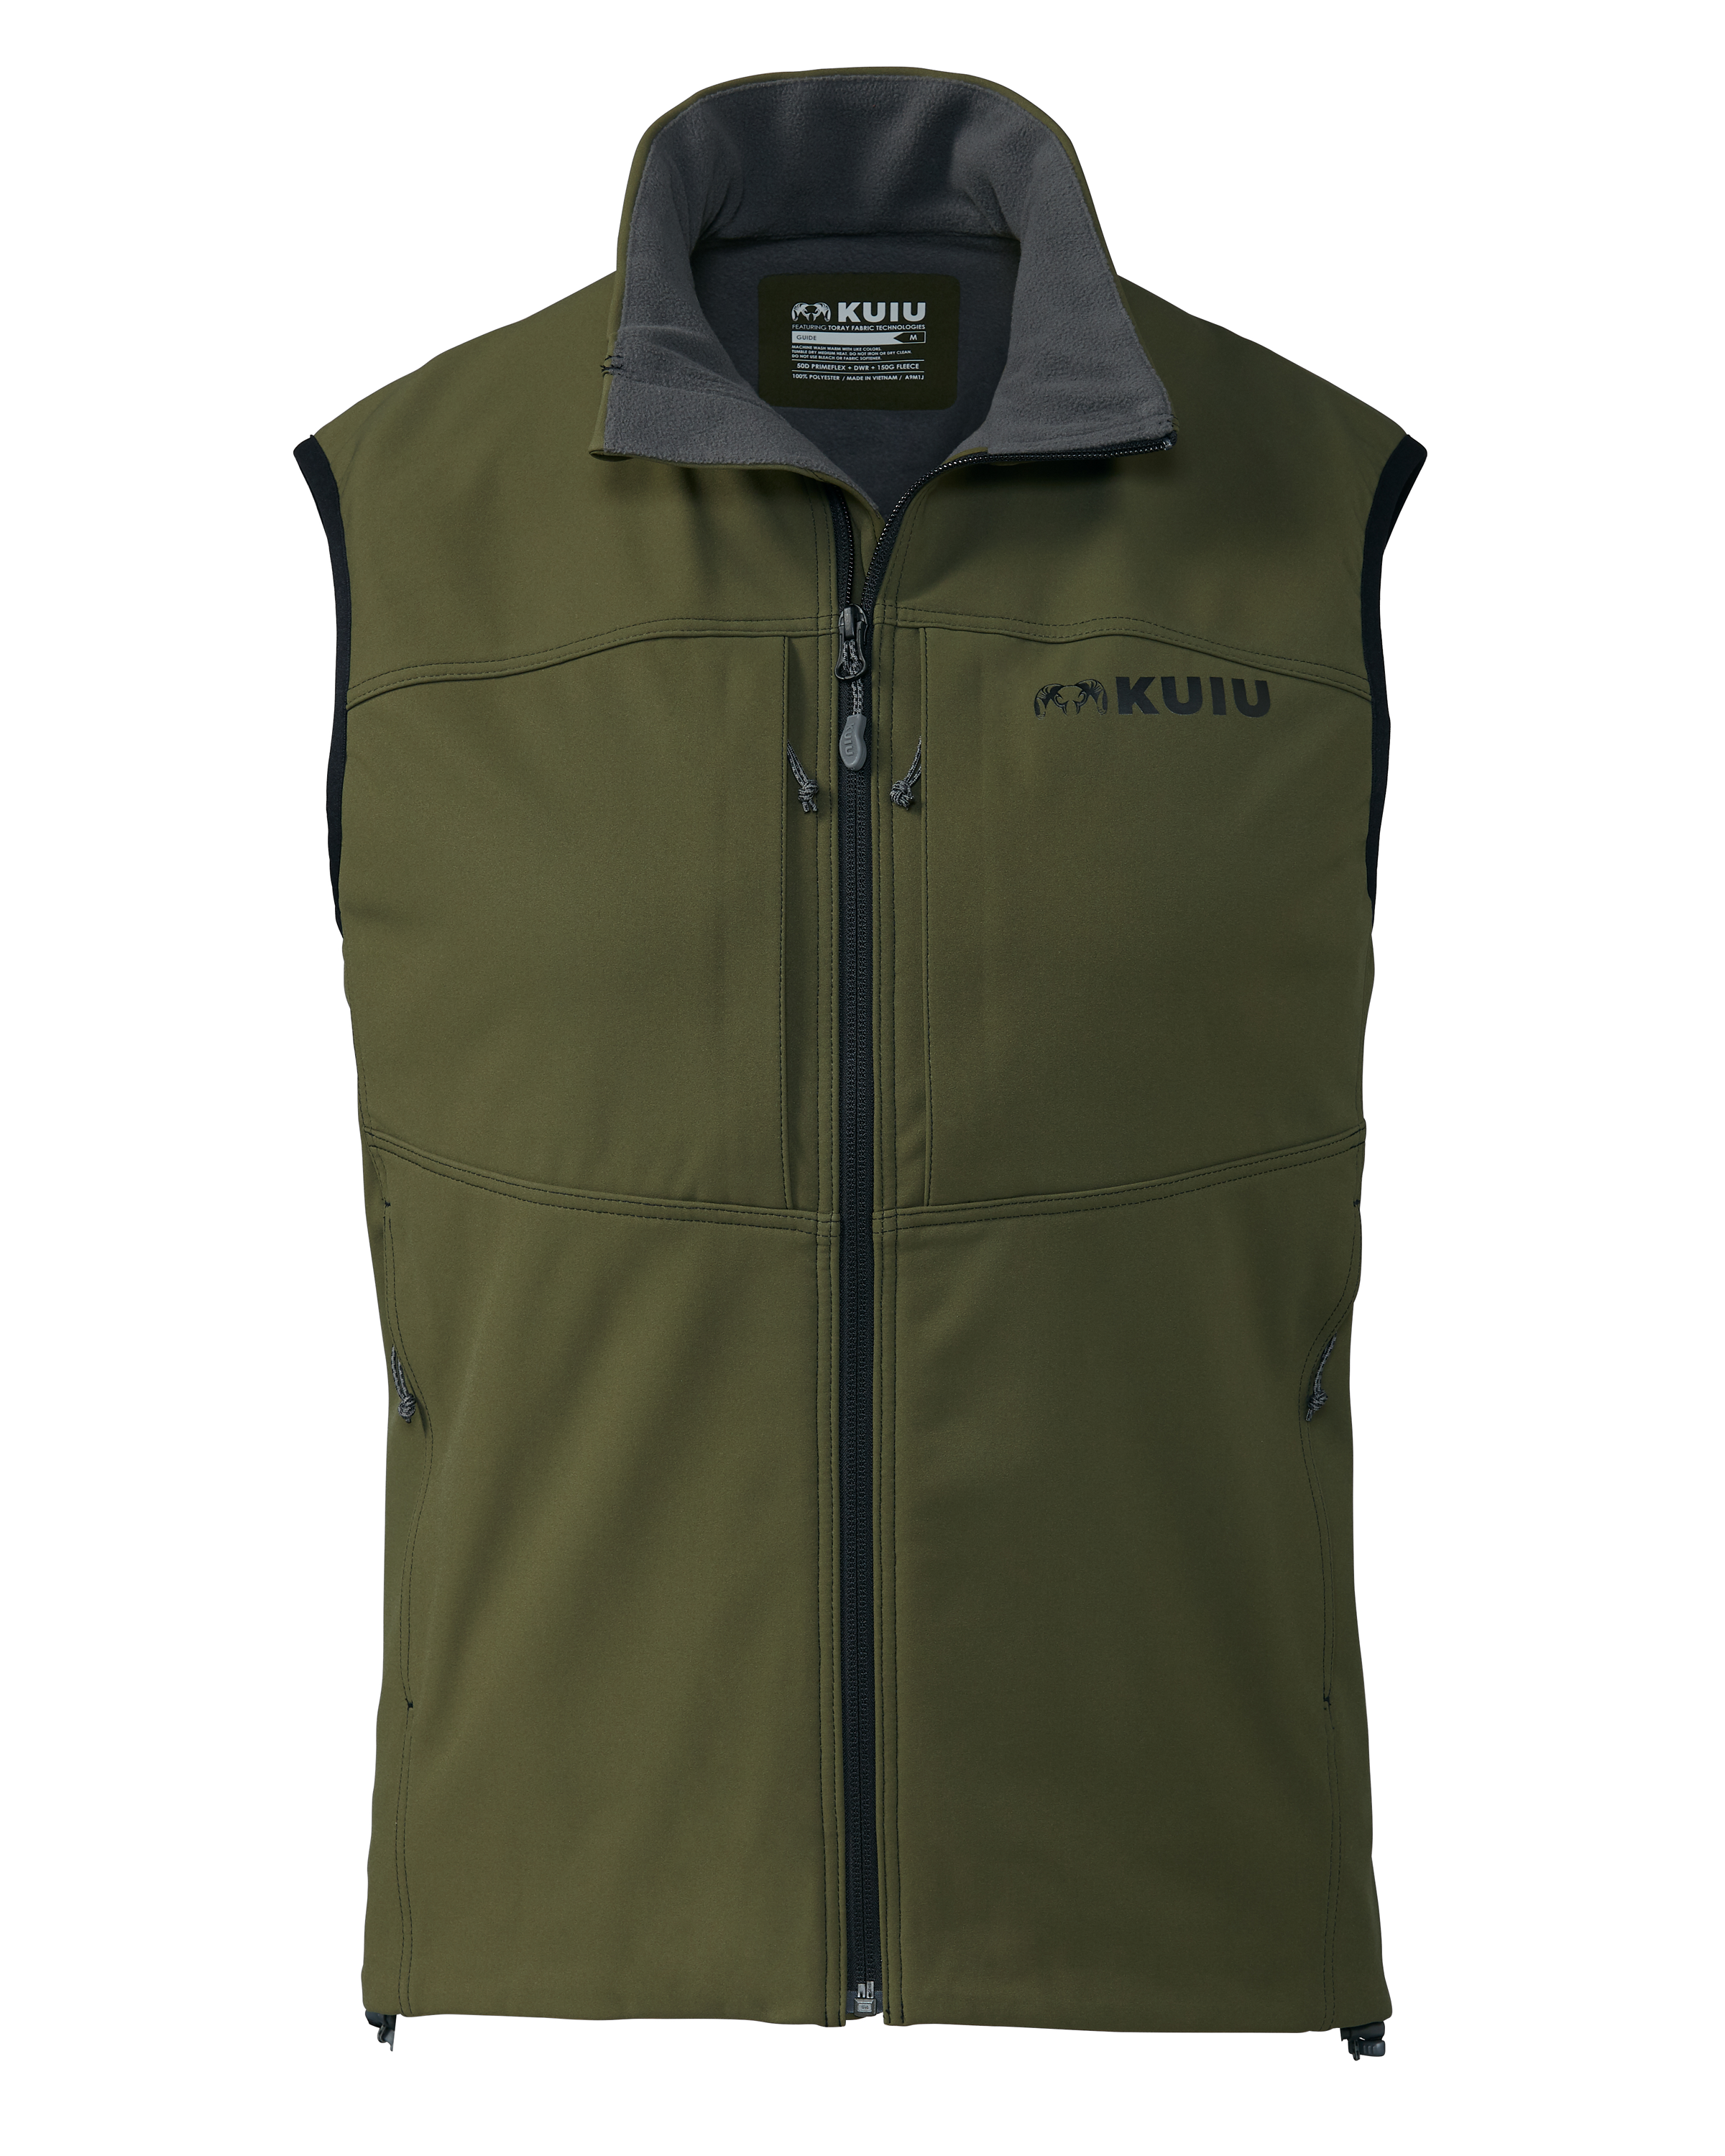 KUIU Guide DCS Hunting Vest in Olive | Size 2XL